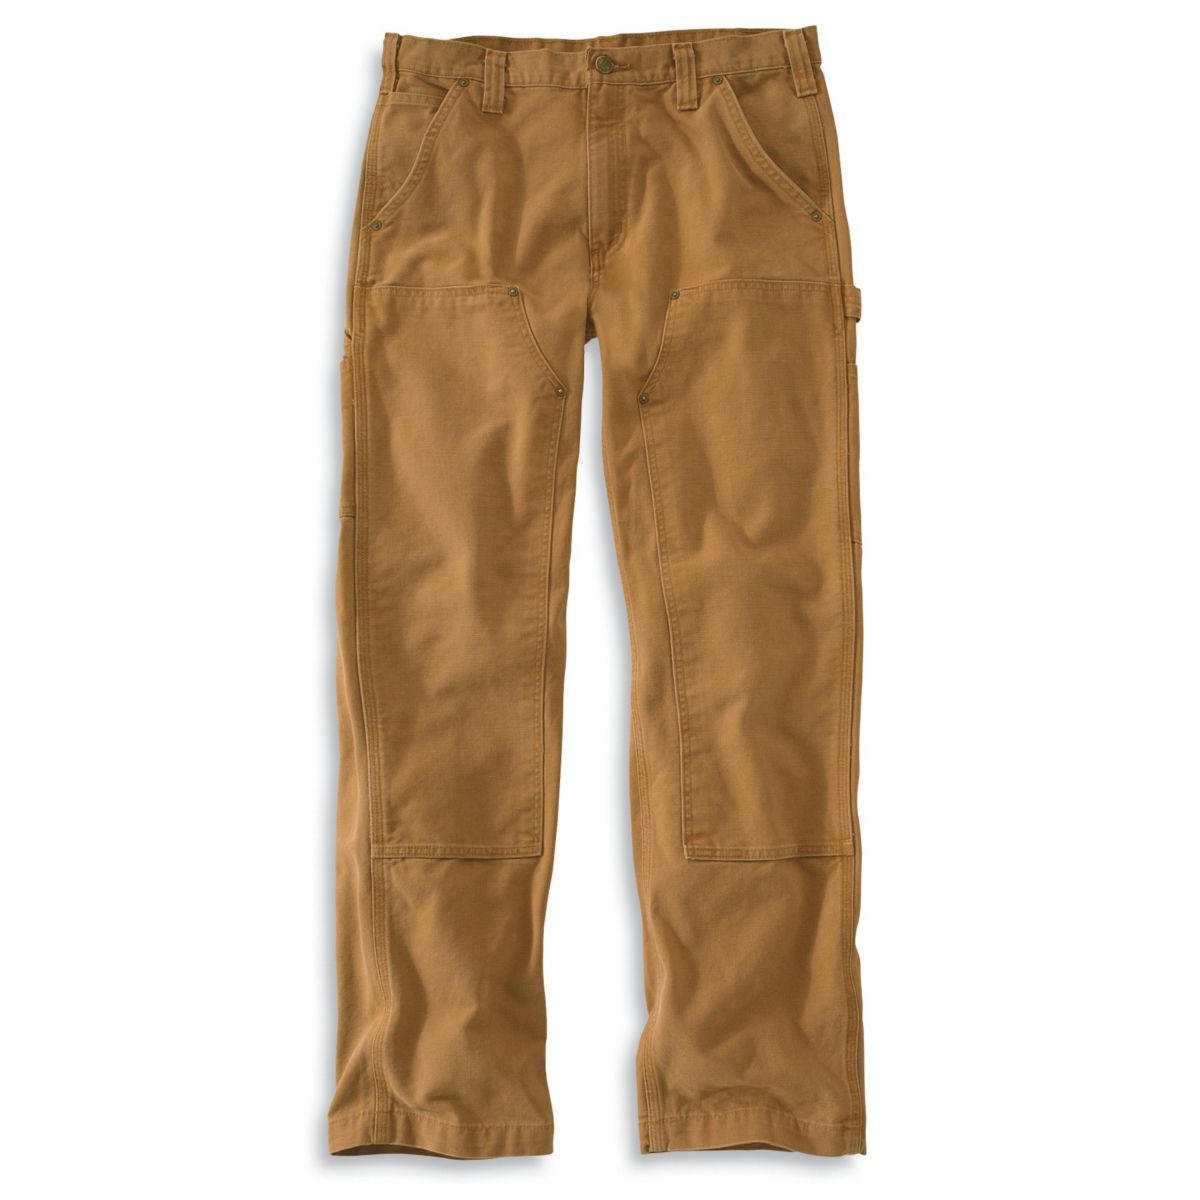 Custom Painted Carhartt Double-Front Work Pants